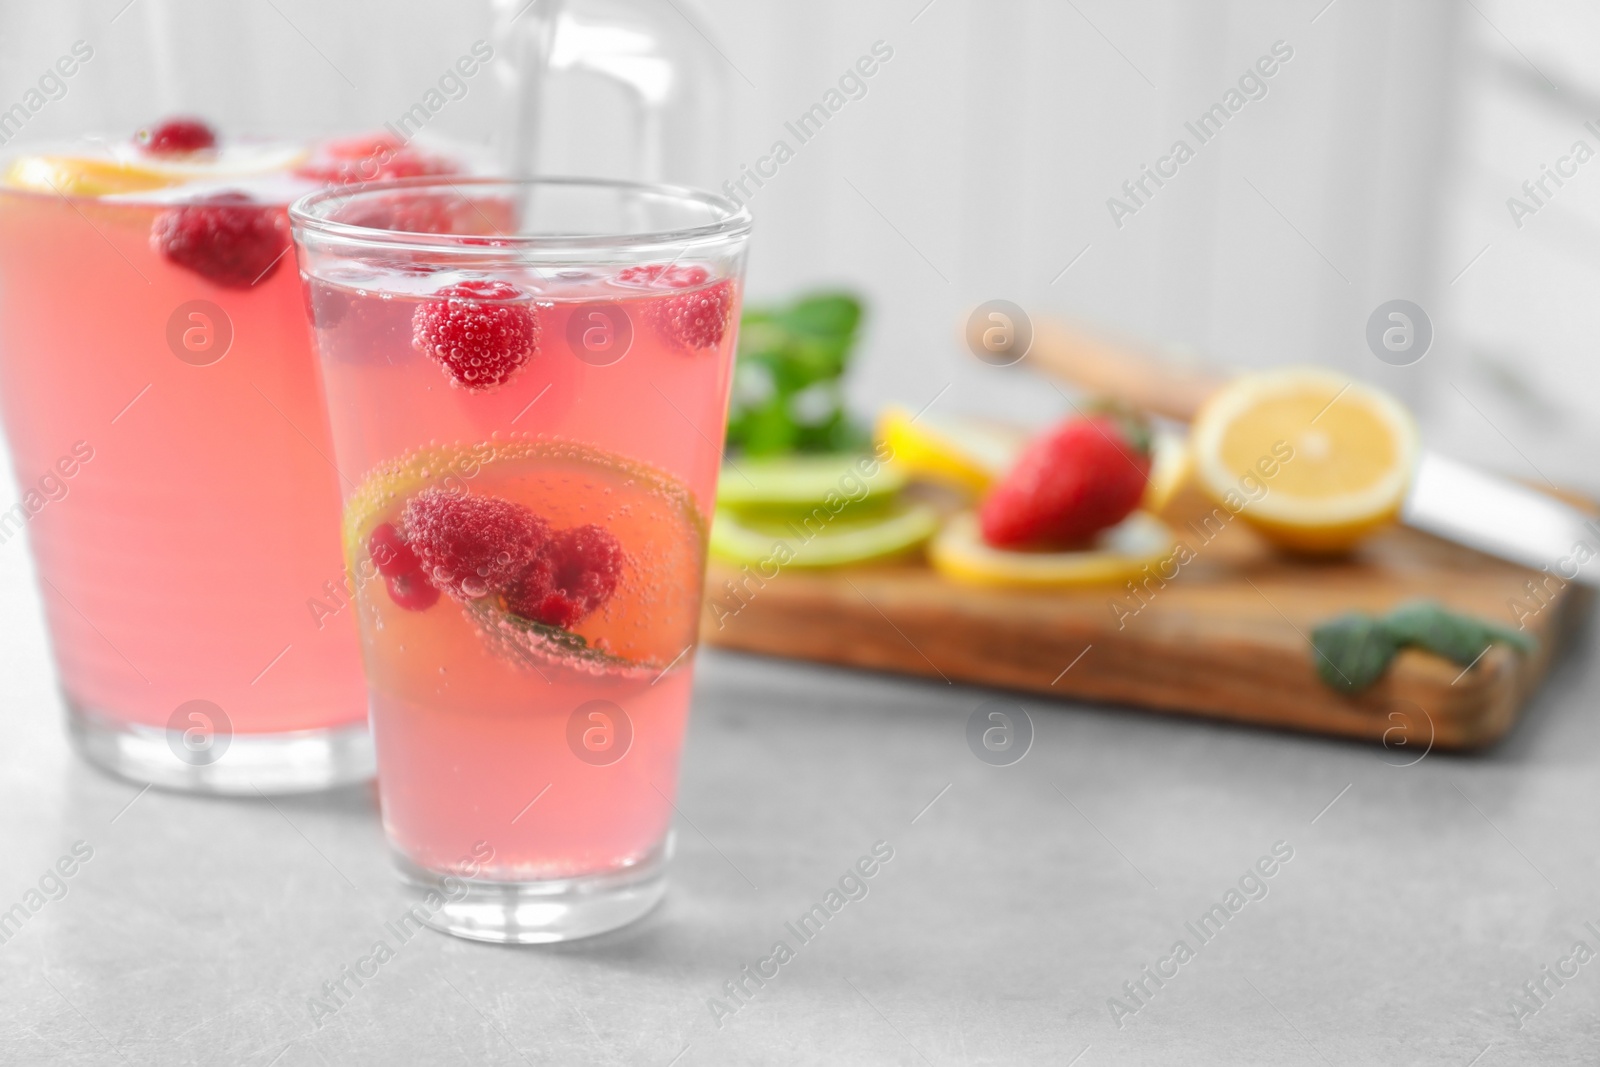 Photo of Jug and glass of fresh lemonade with berries on table